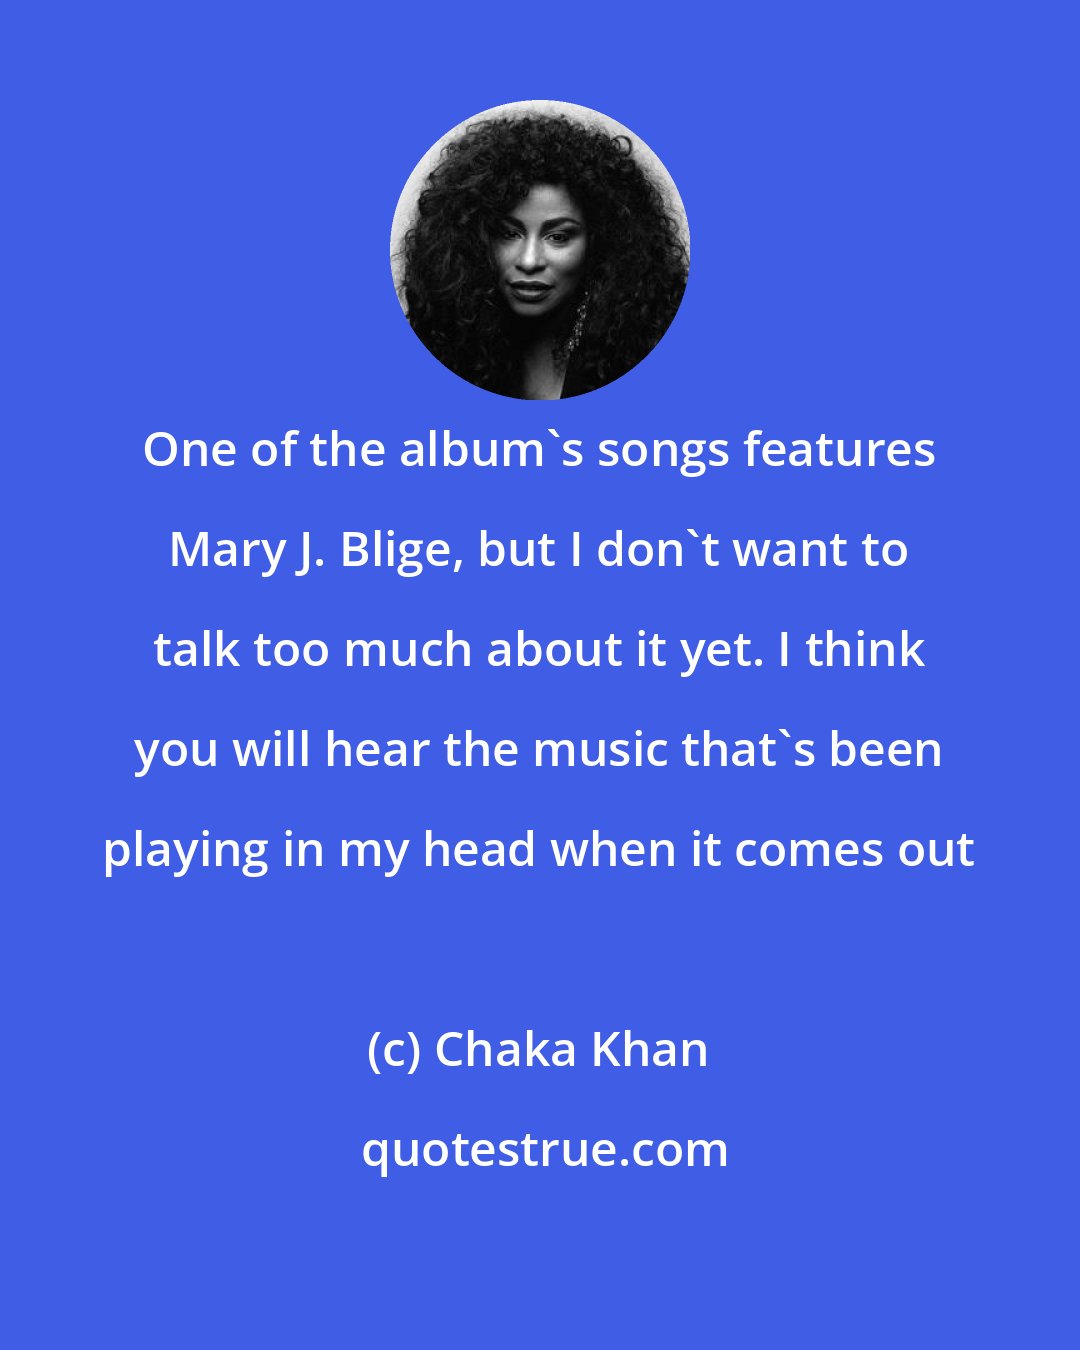 Chaka Khan: One of the album's songs features Mary J. Blige, but I don't want to talk too much about it yet. I think you will hear the music that's been playing in my head when it comes out